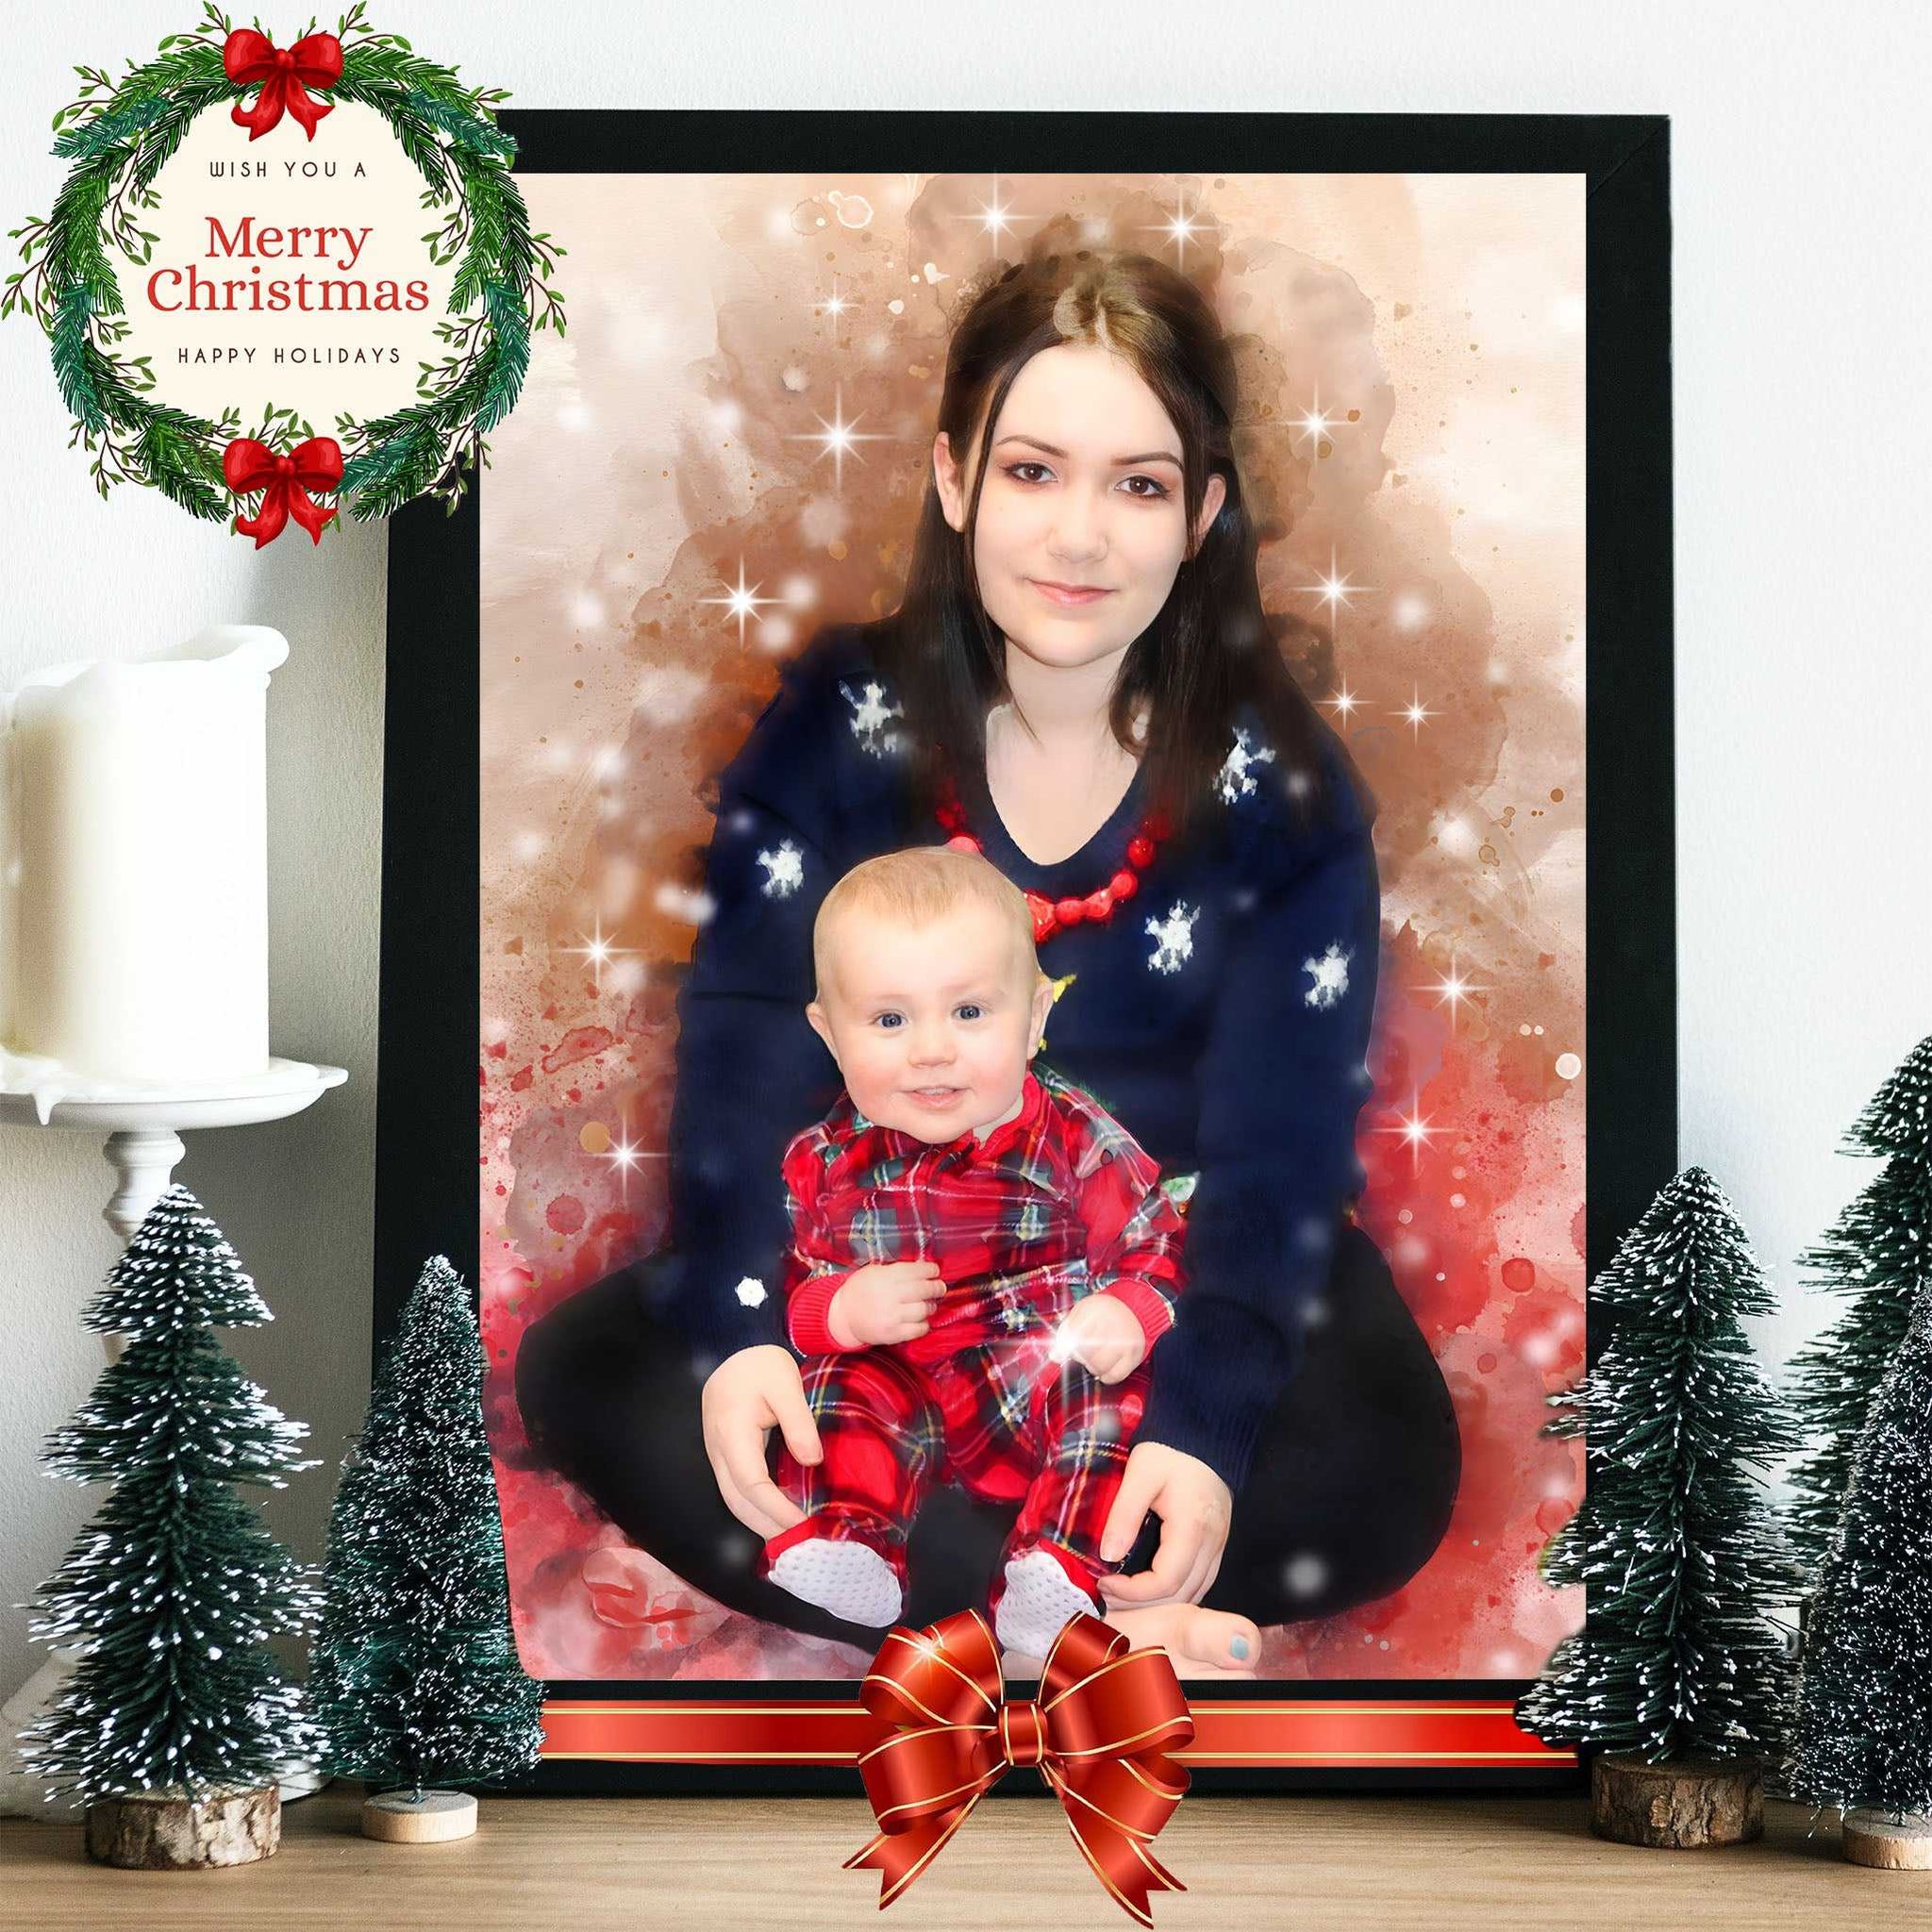 Christmas Gift Wife | Gift Ideas for Women | Presents for your Wife for Christmas - FromPicToArt